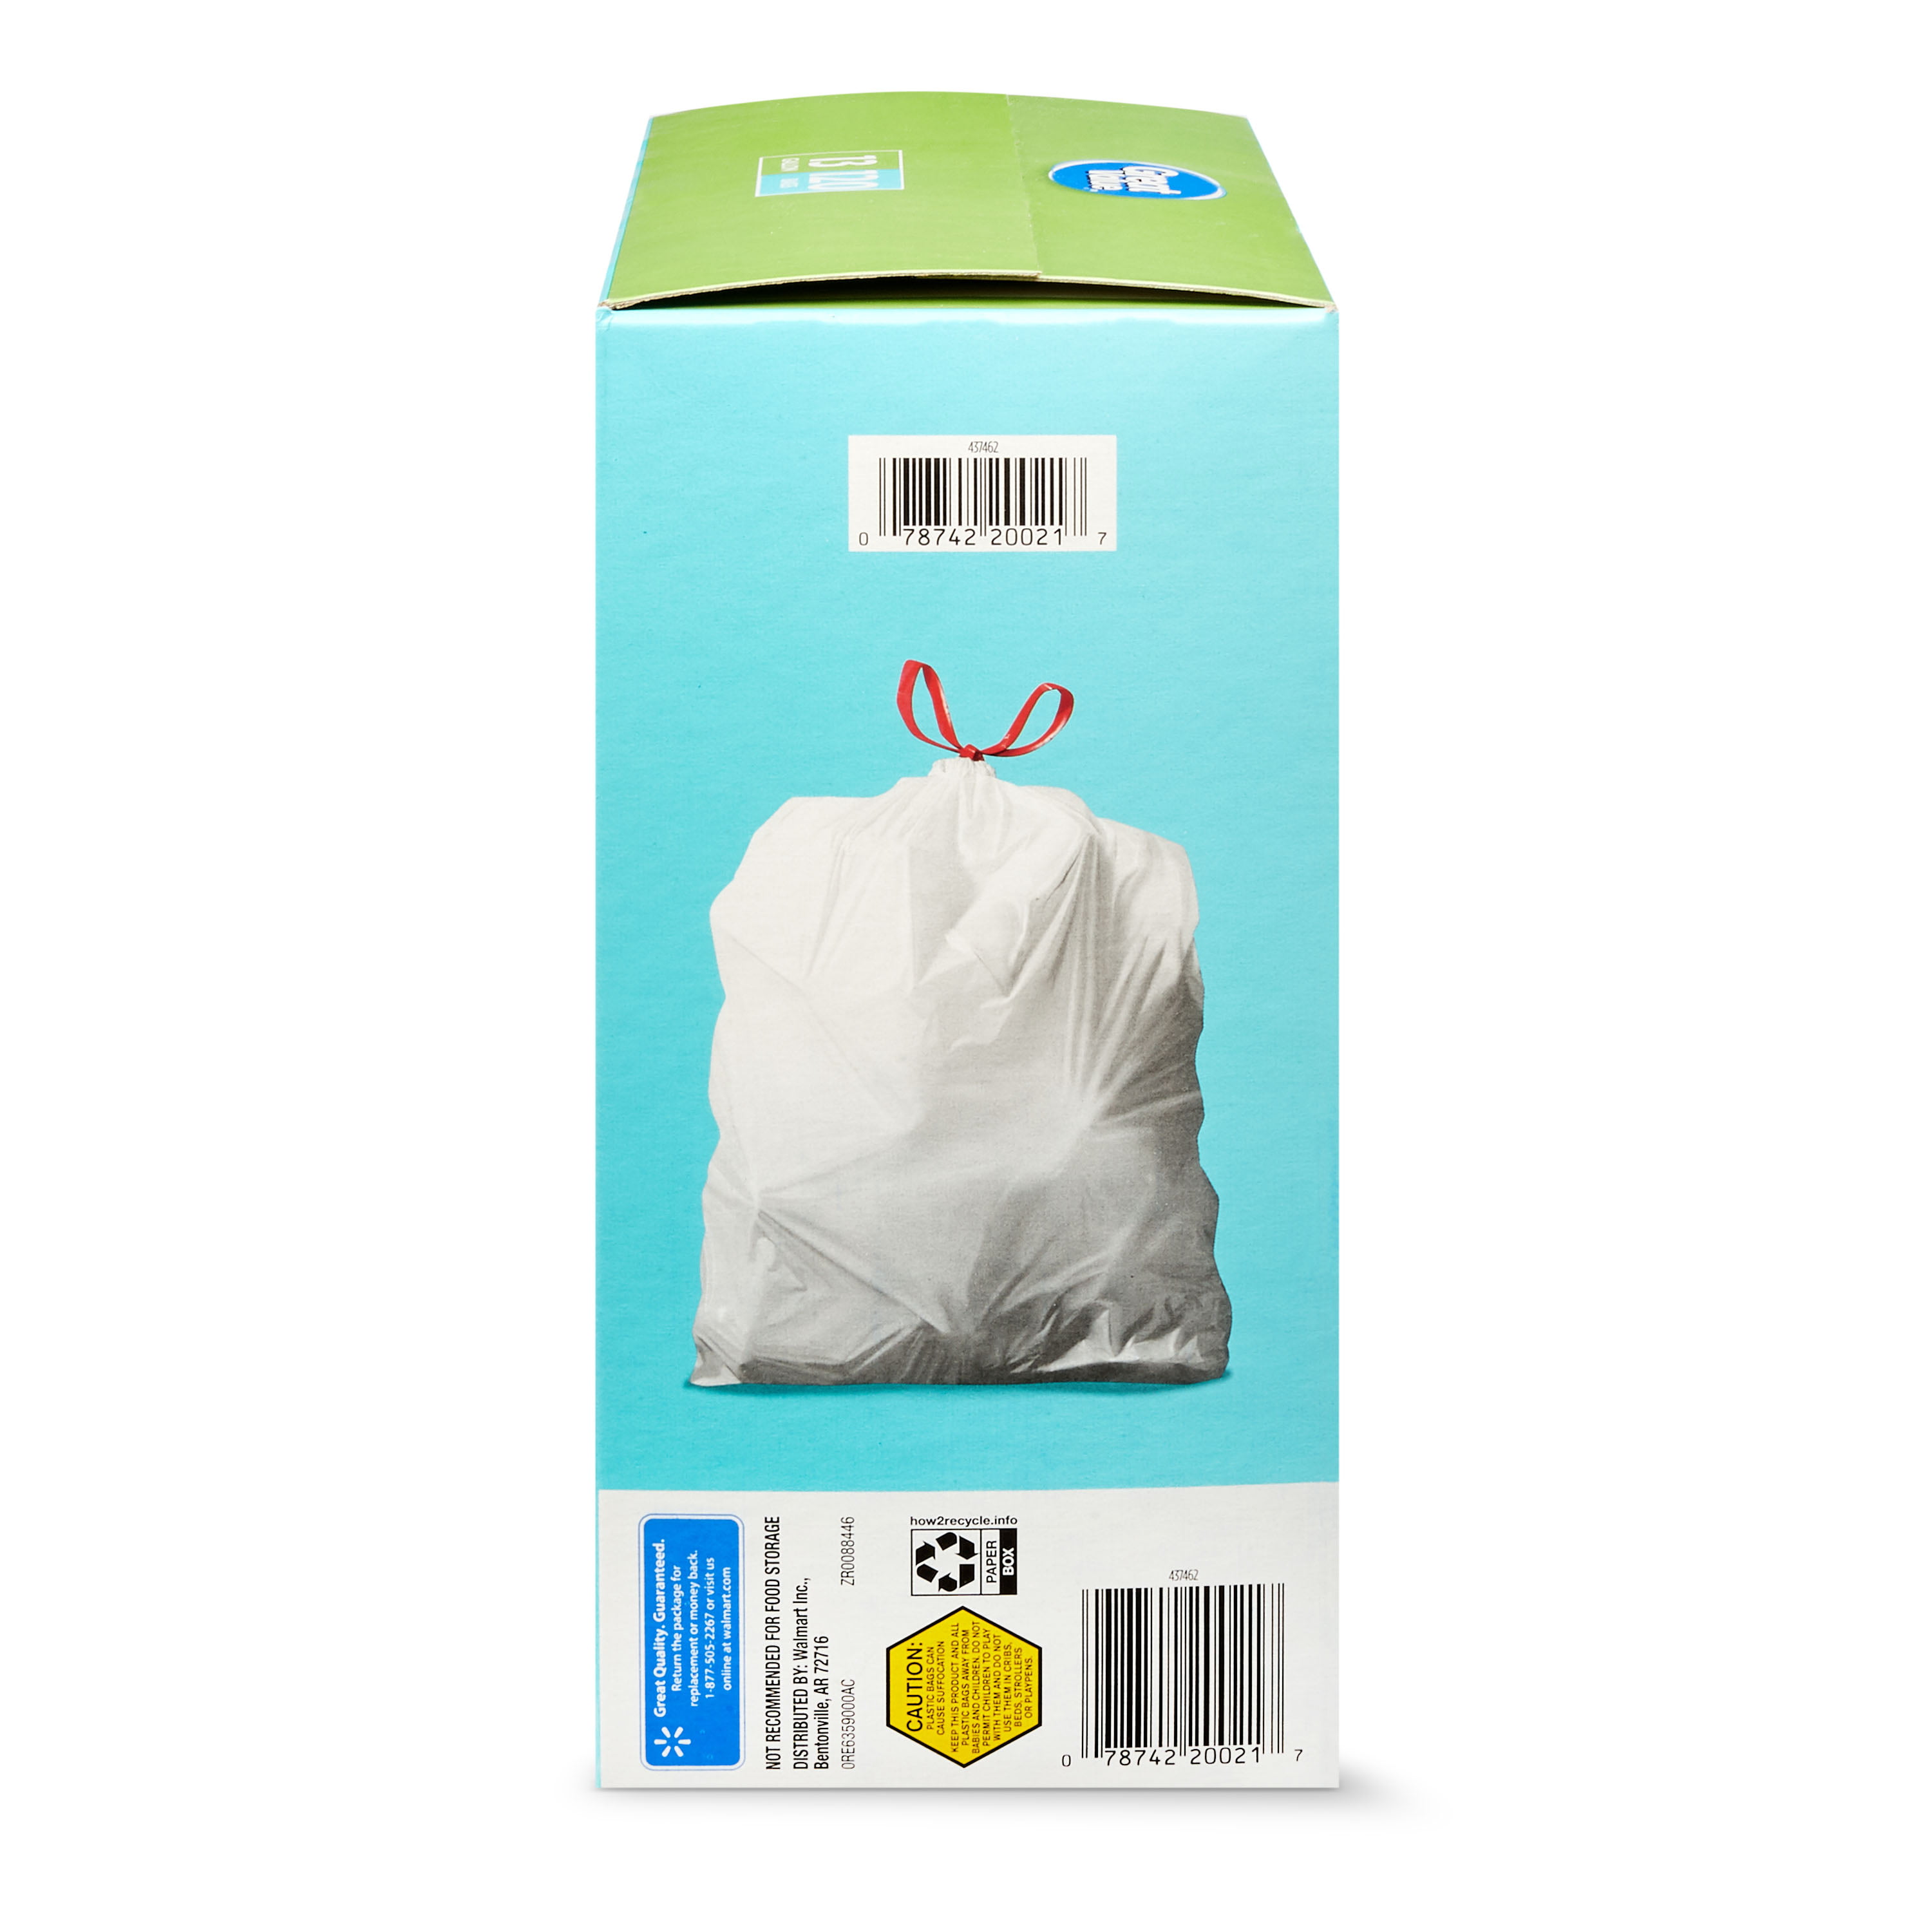 Buy High-Quality 10 Gallon Trash Bags – Perfect for Your Home or